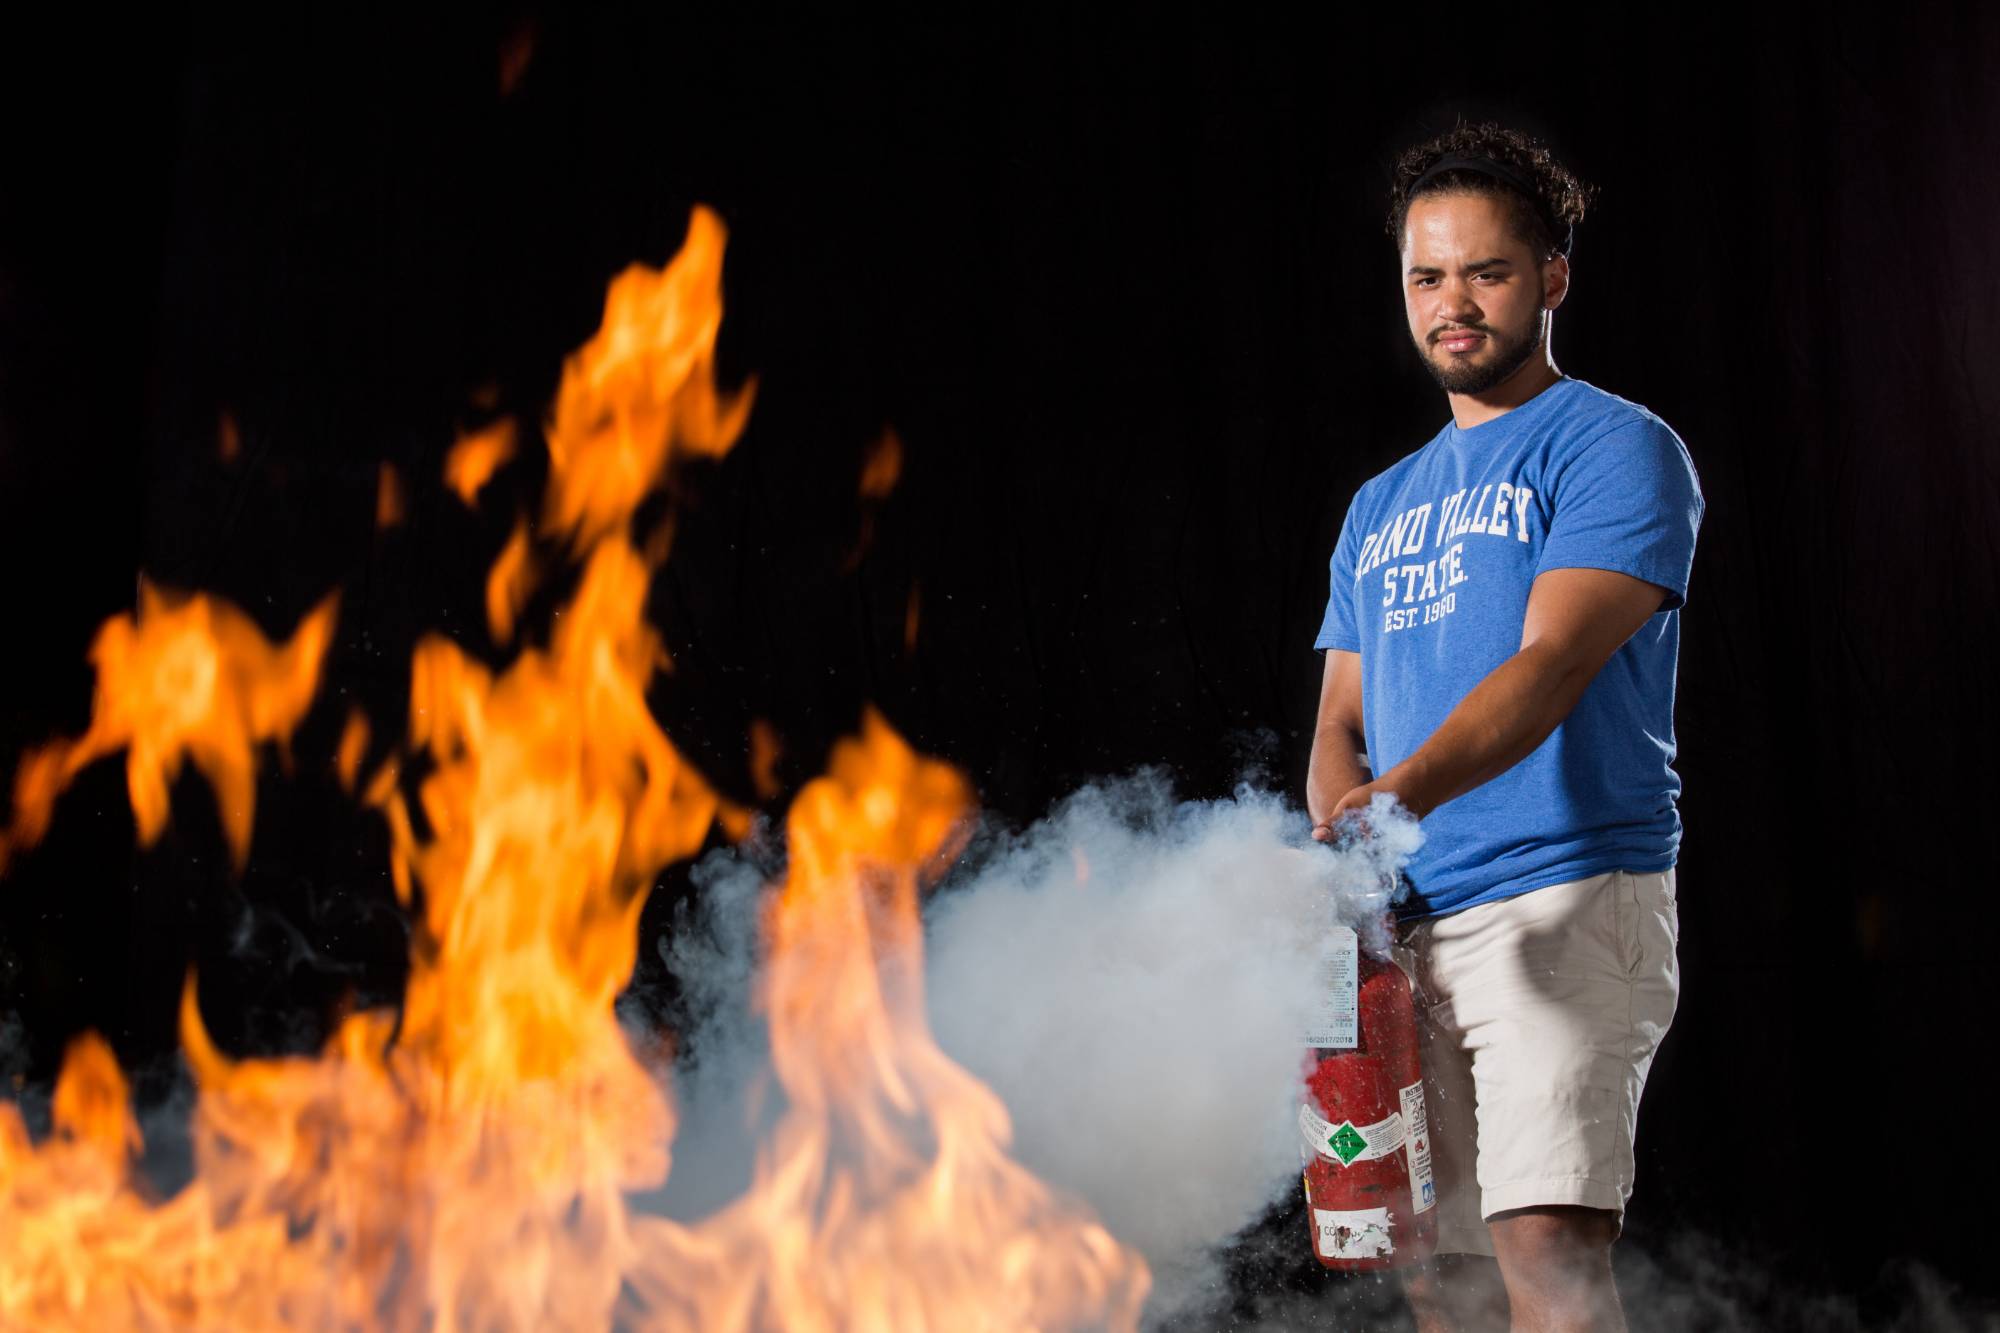 A student trains with a fire extinguisher